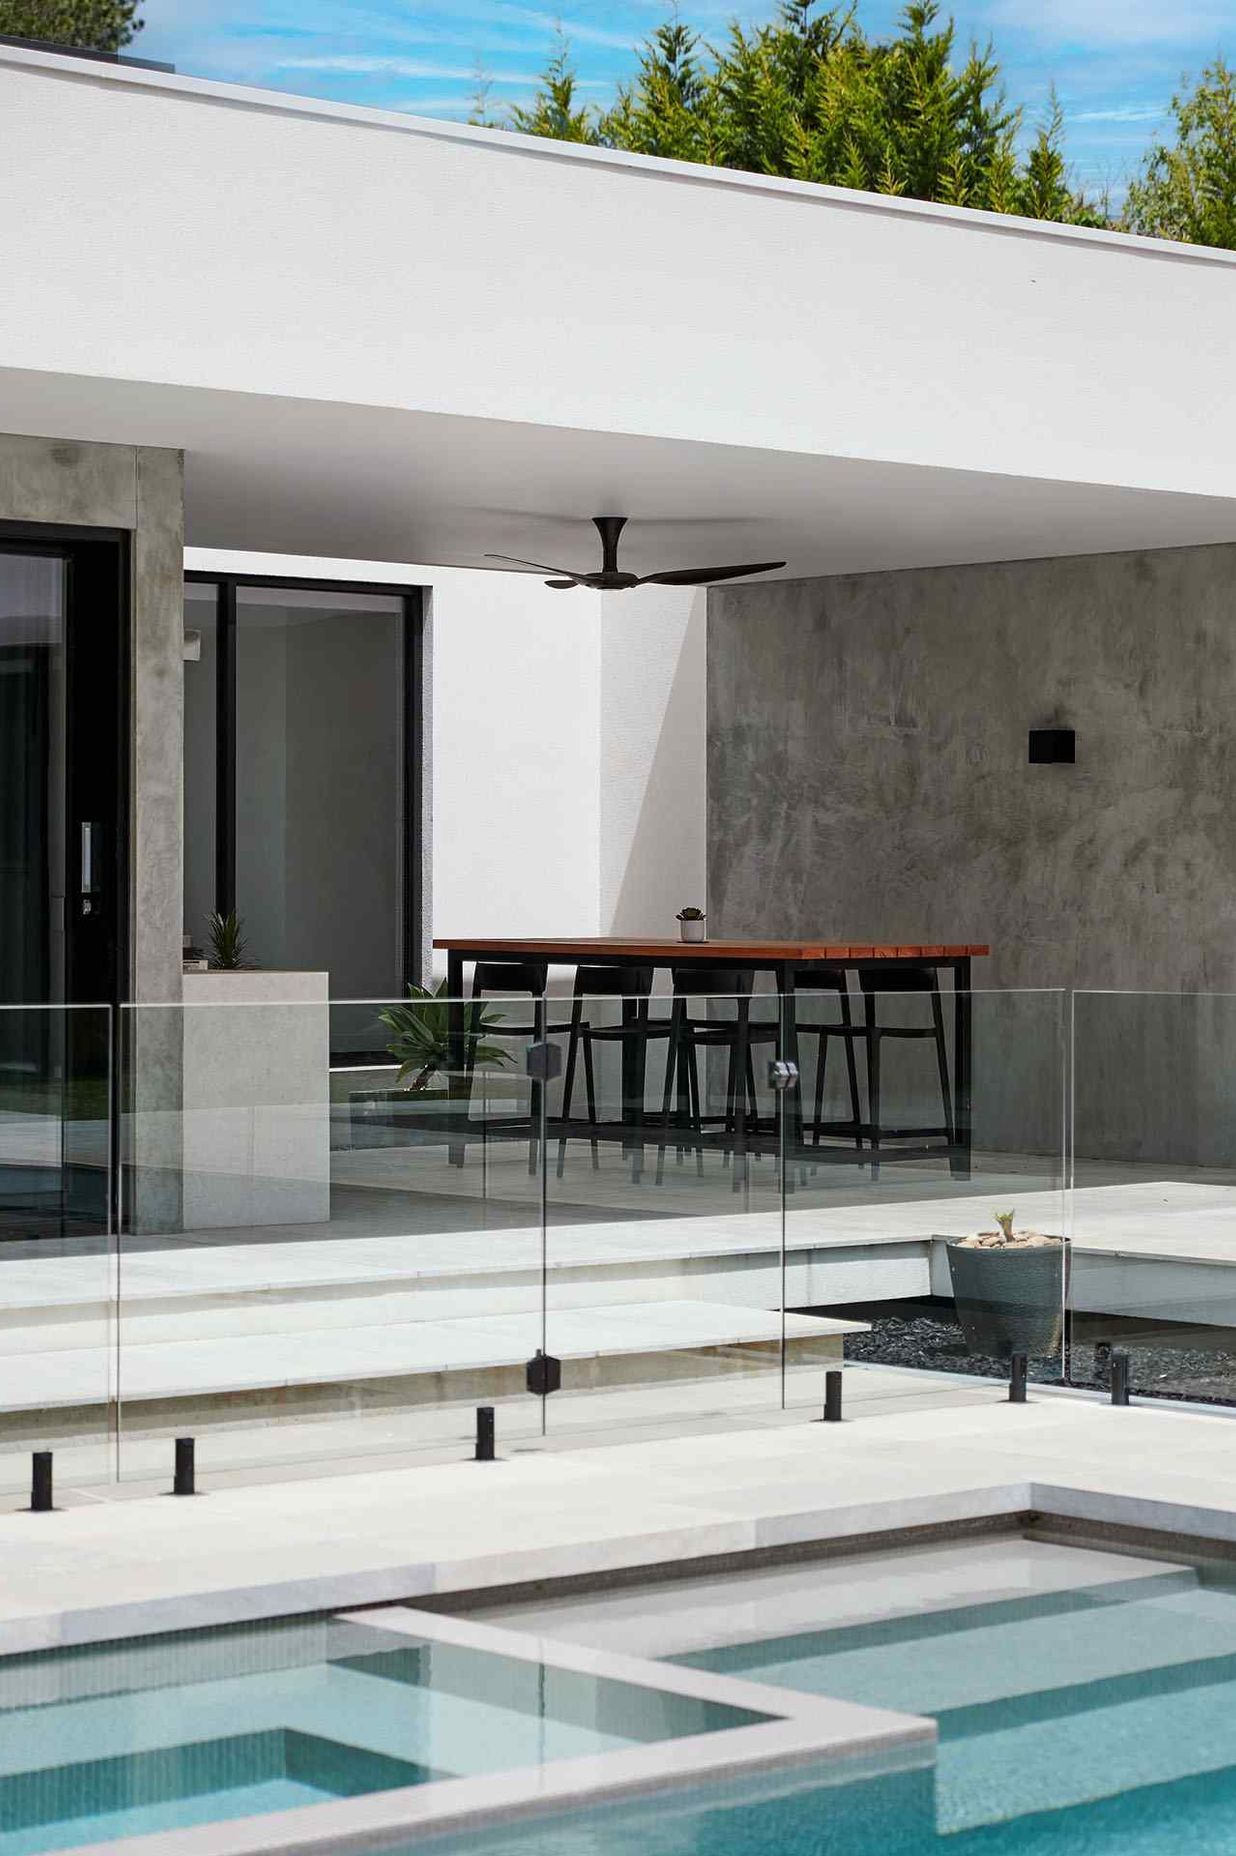 The framless glass allows the spaces to seamlessly connect.